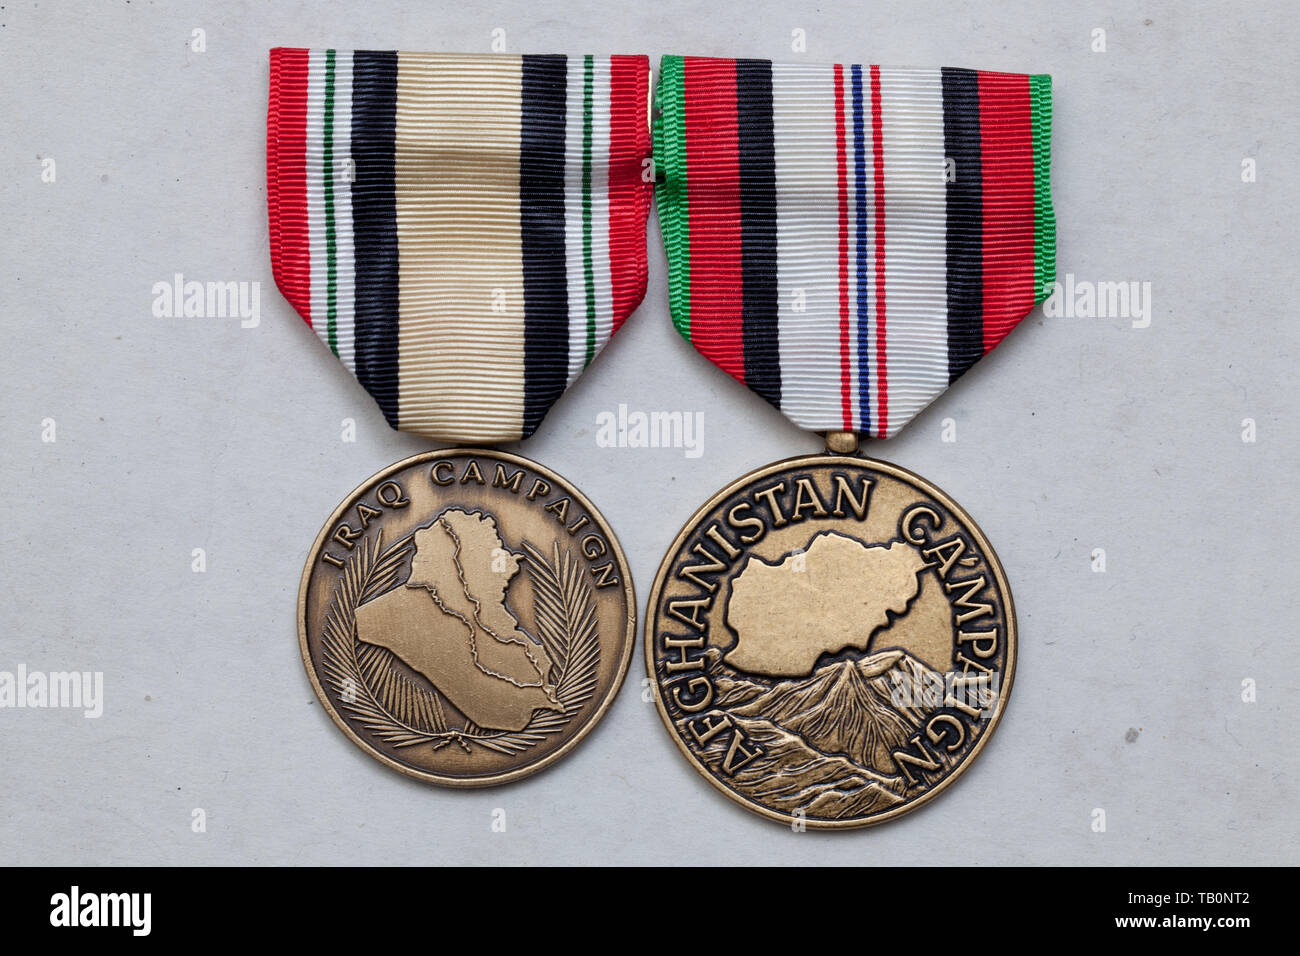 Operations Enduring Freedom and Iraqi Freedom medals Stock Photo - Alamy